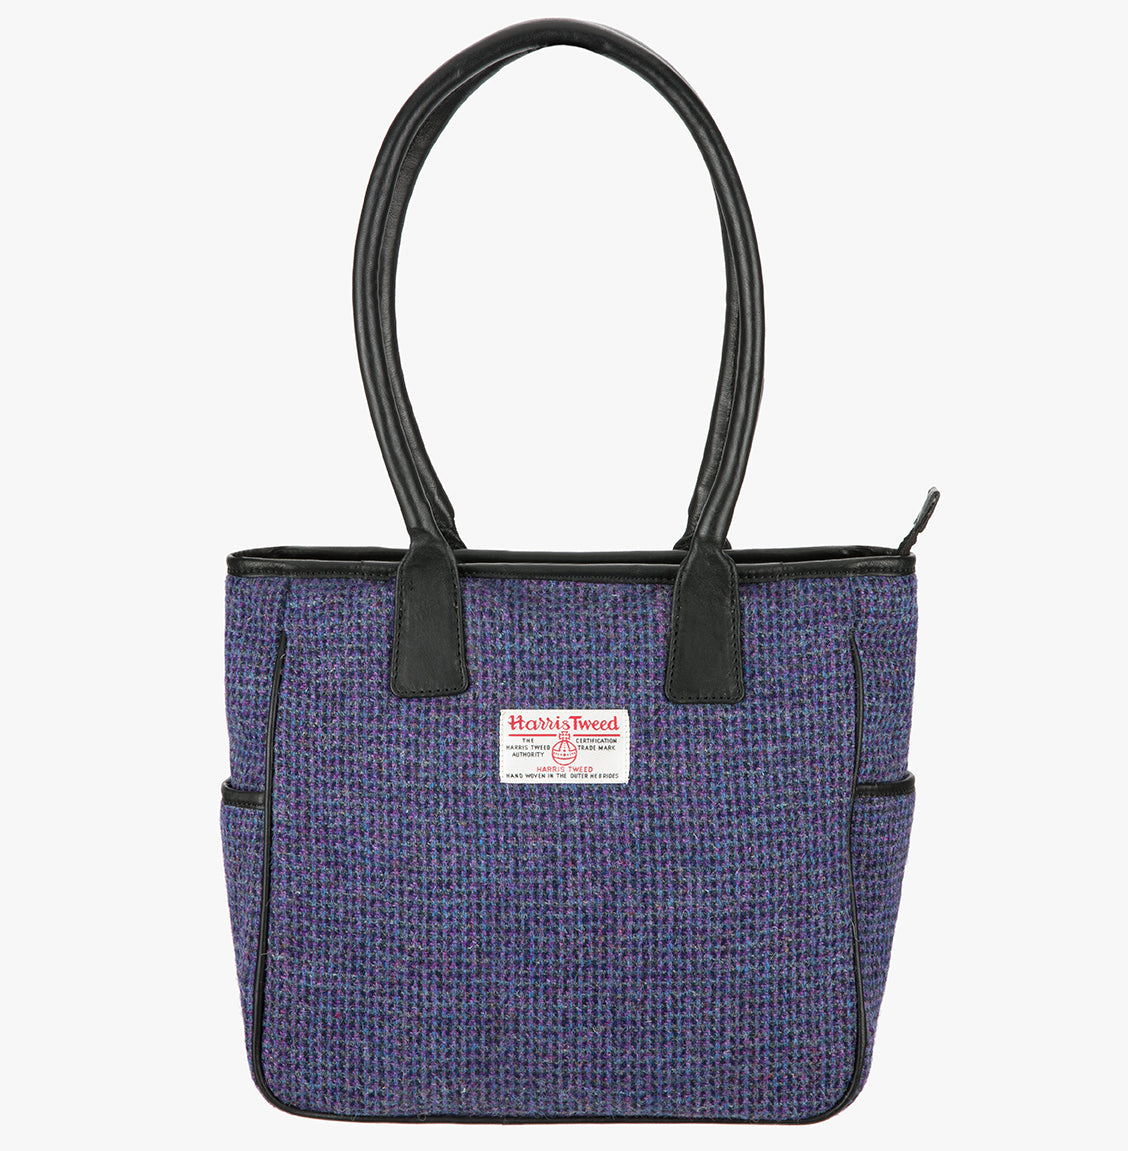 Harris Tweed tote bag with handles that go over the shoulder. This bag is violet Harris Tweed with black leather handles. It has a pocket on each side of the bag trimmed in black leather and a harris tweed logo on the front in the middle of the bag.